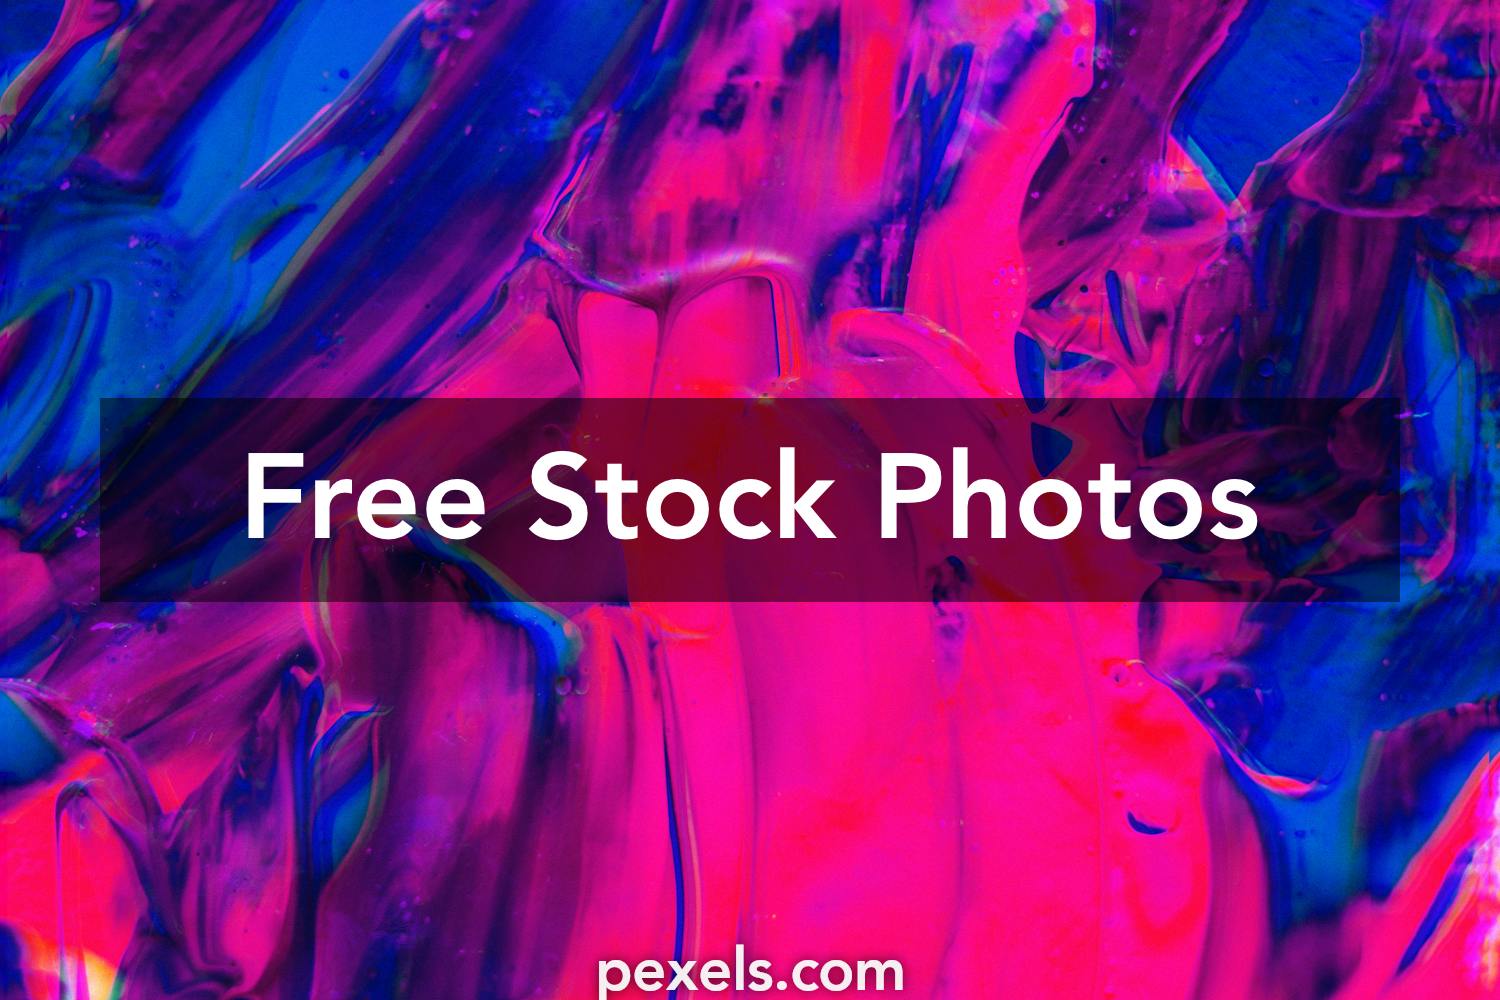 Abstract Images Pexels Free Stock Photos Images, Photos, Reviews